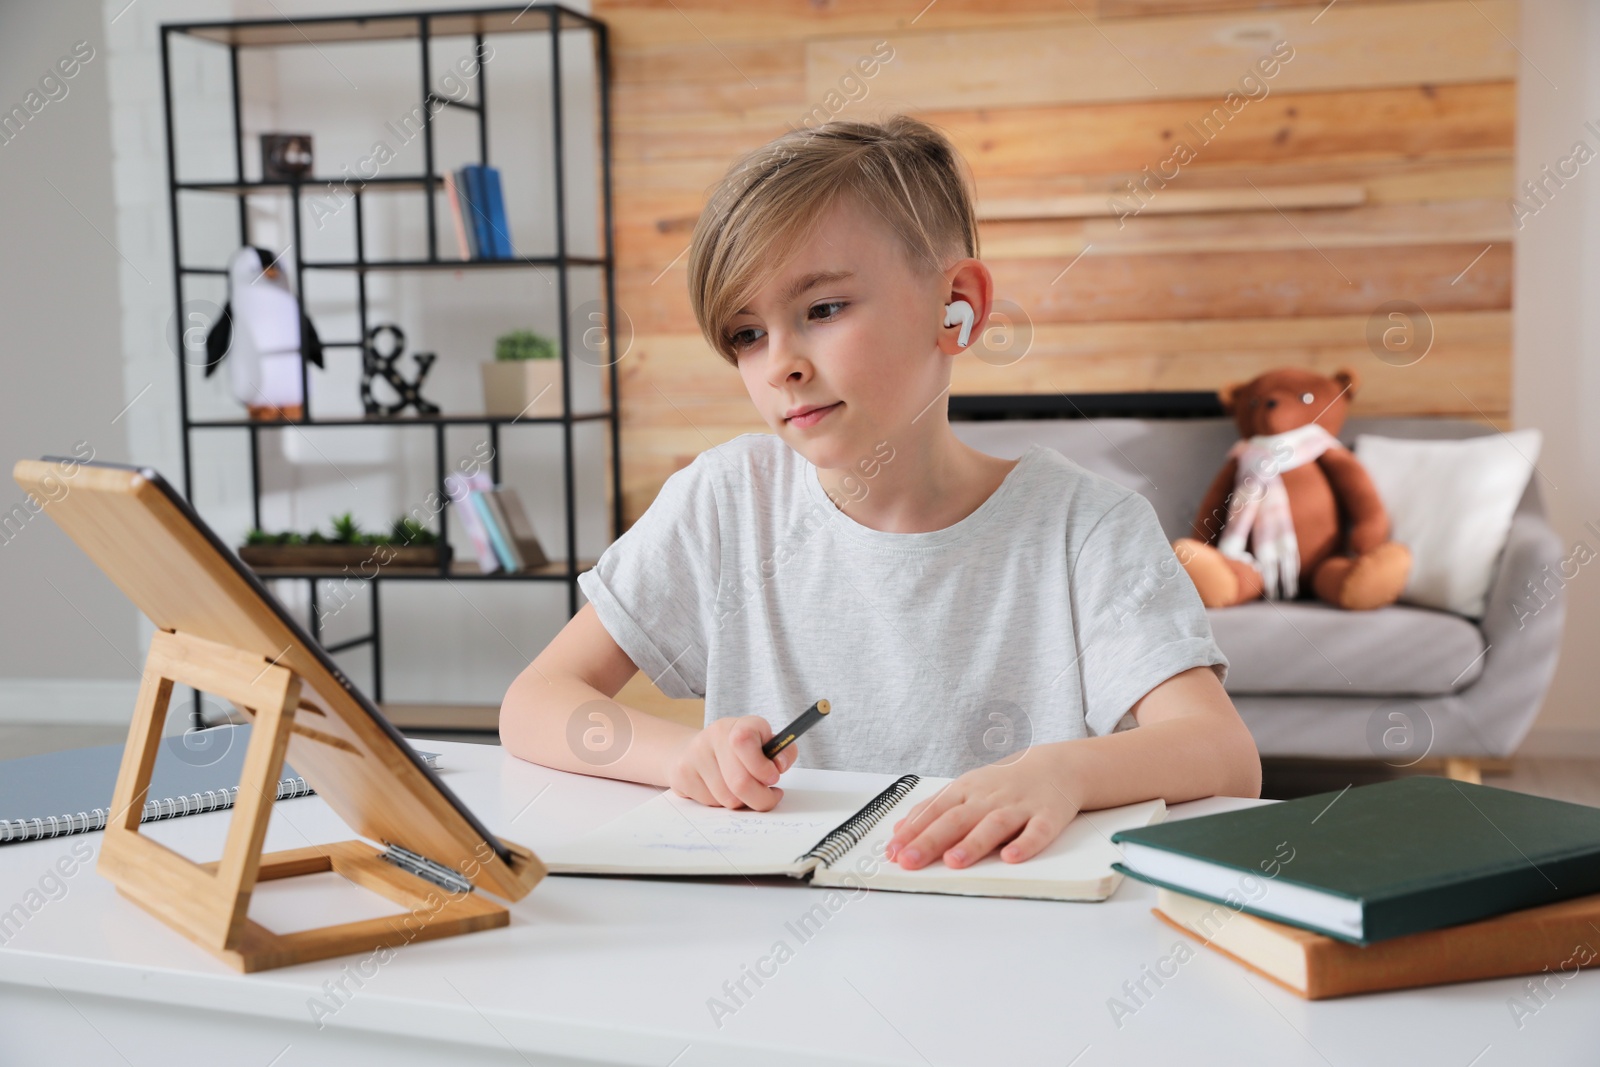 Photo of Boy in earphones doing homework with tablet at table indoors